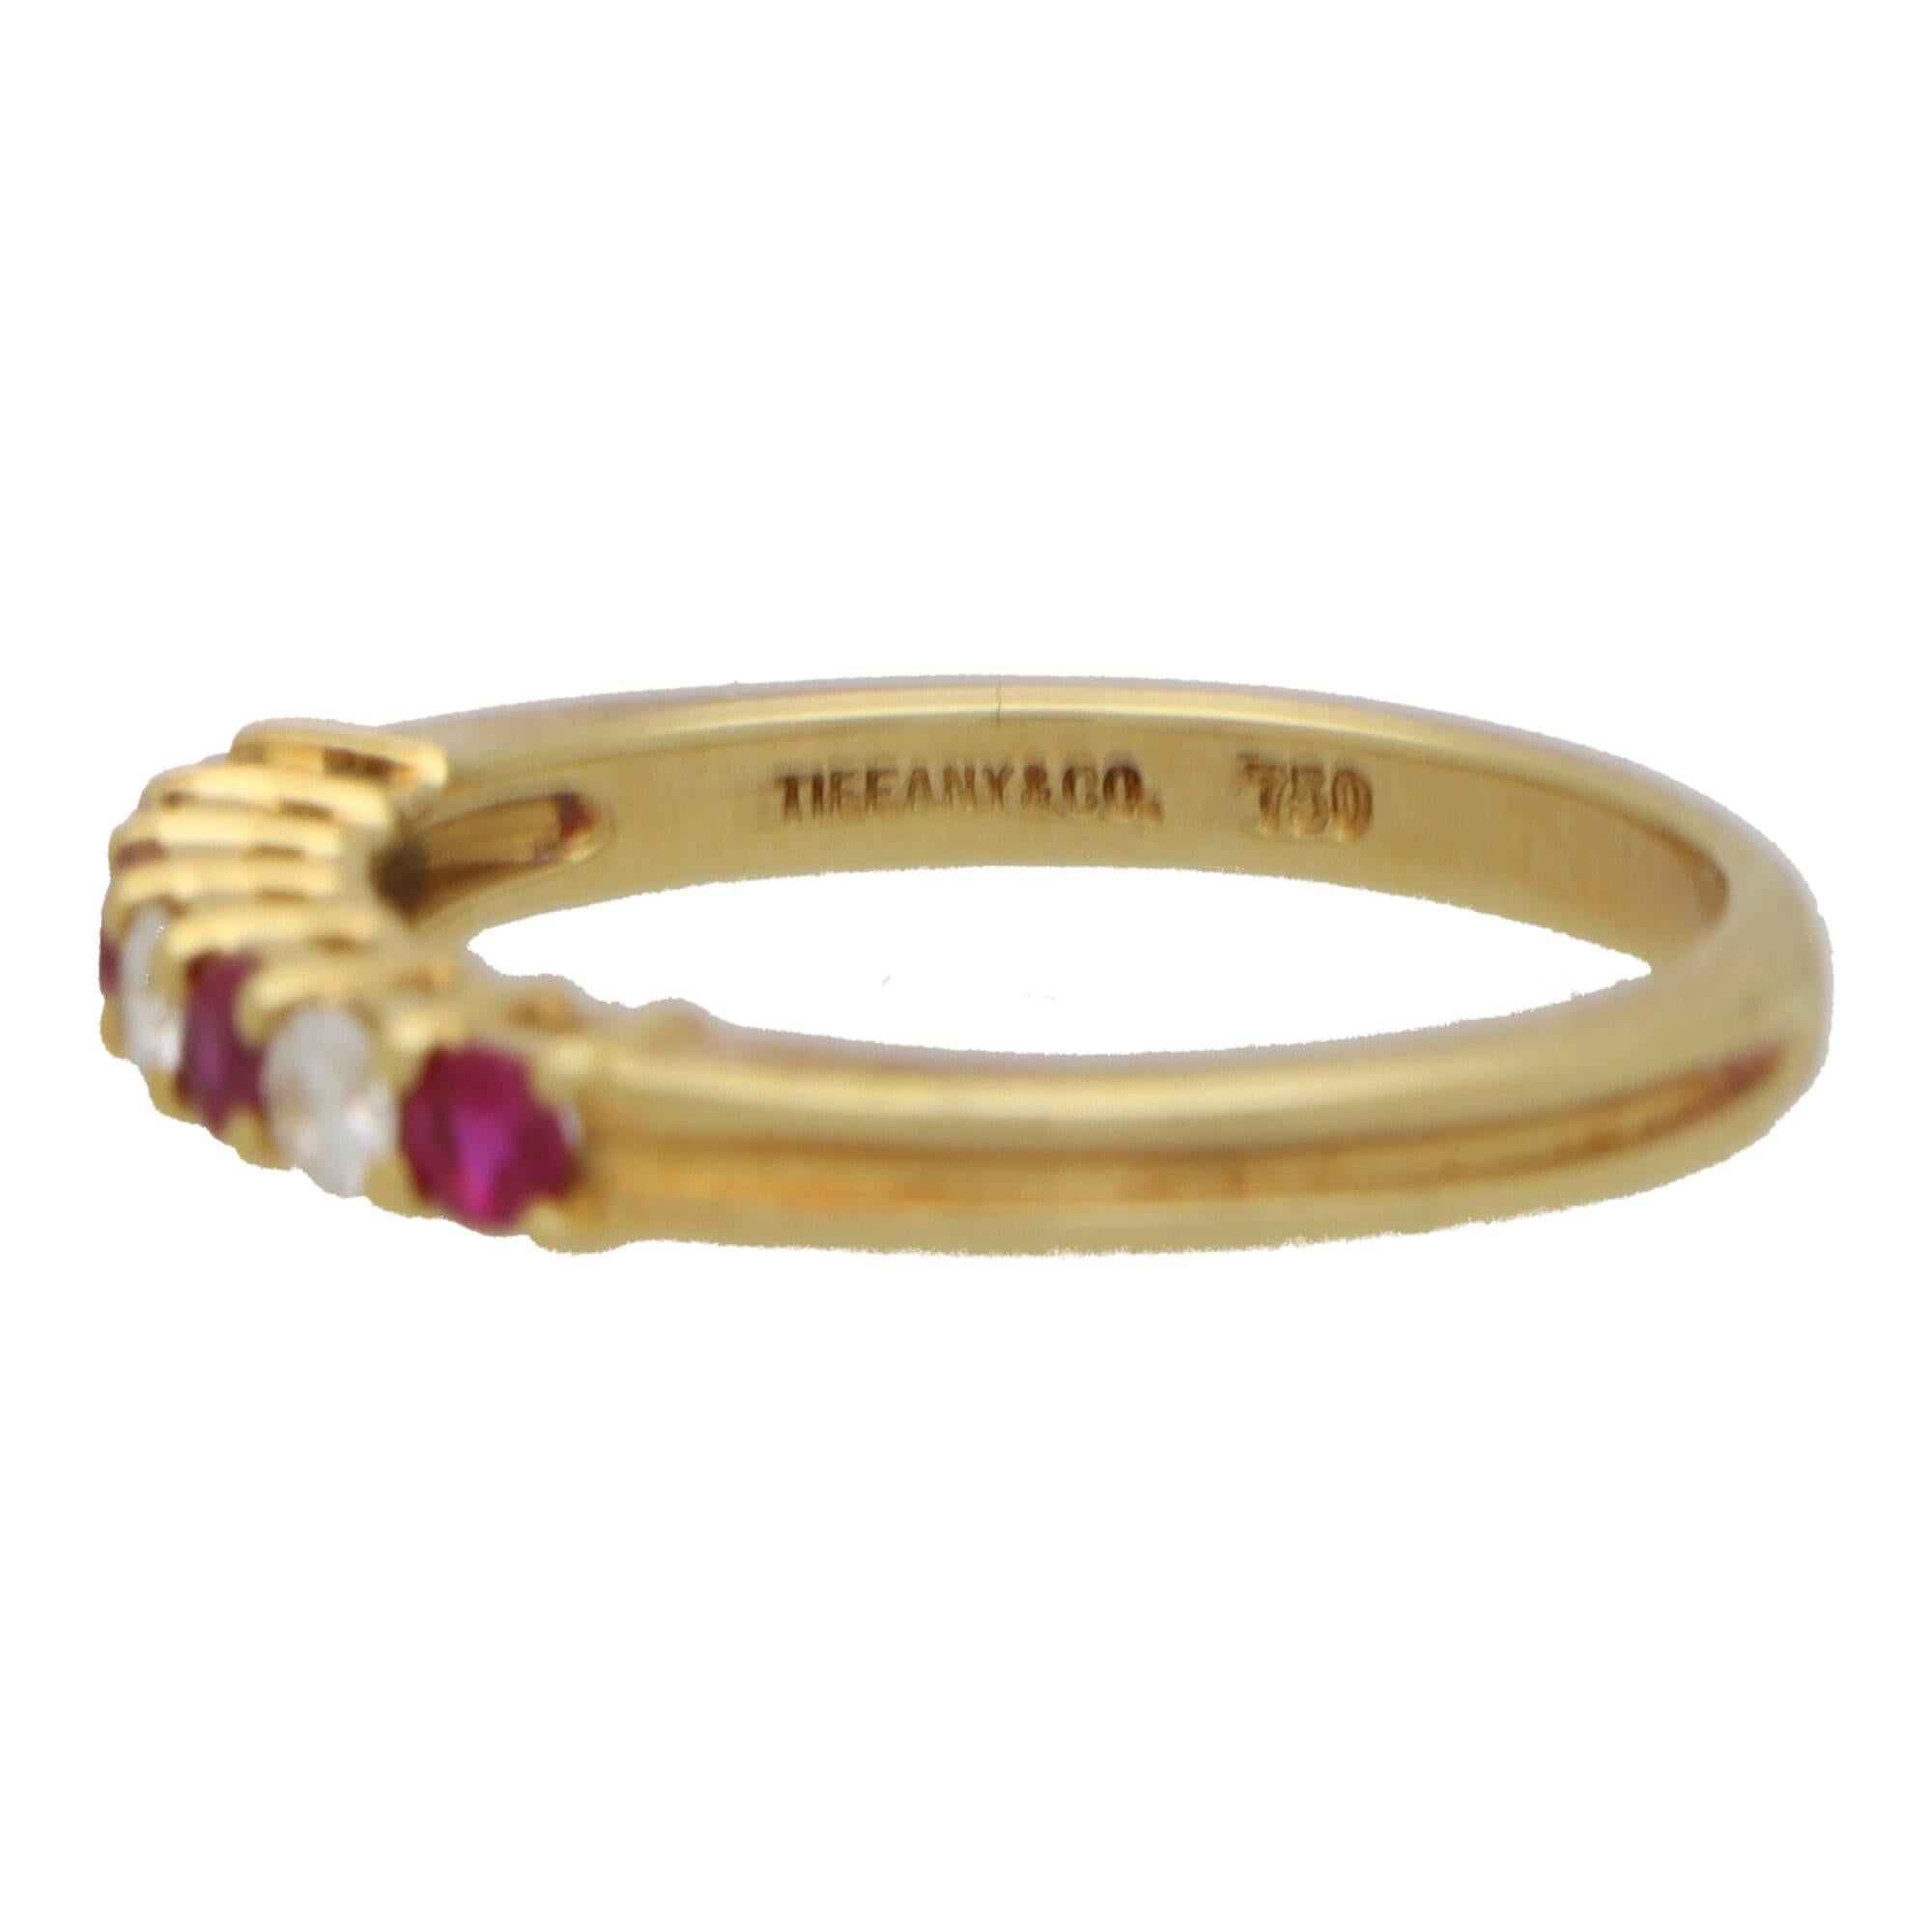 Modern Vintage Tiffany & Co. Ruby and Diamond Half Eternity Ring in Yellow Gold